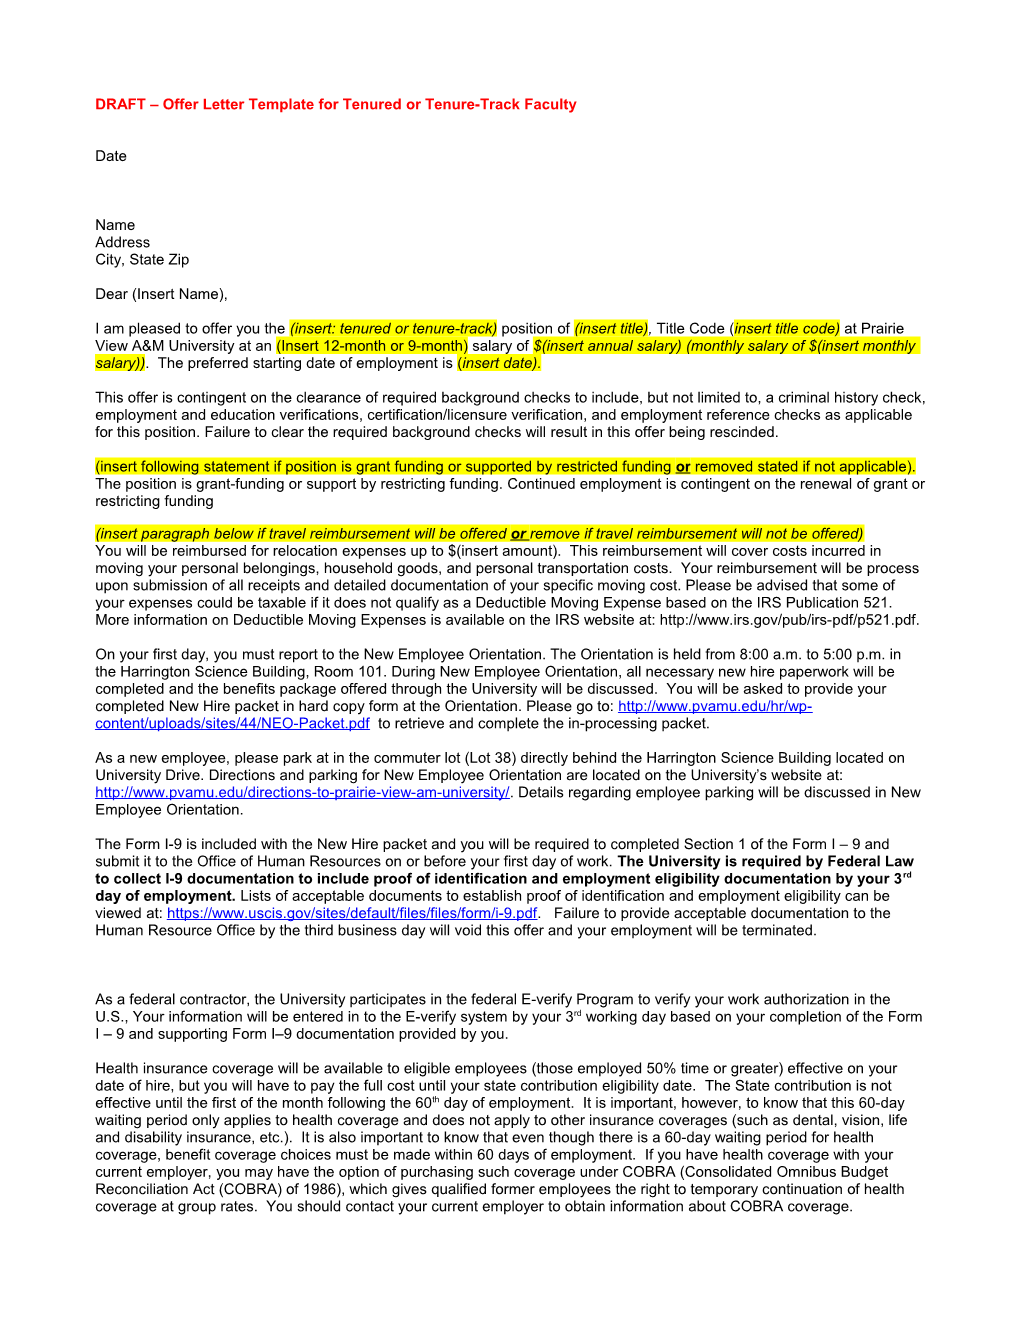 DRAFT Offer Letter Template for Tenured Or Tenure-Track Faculty